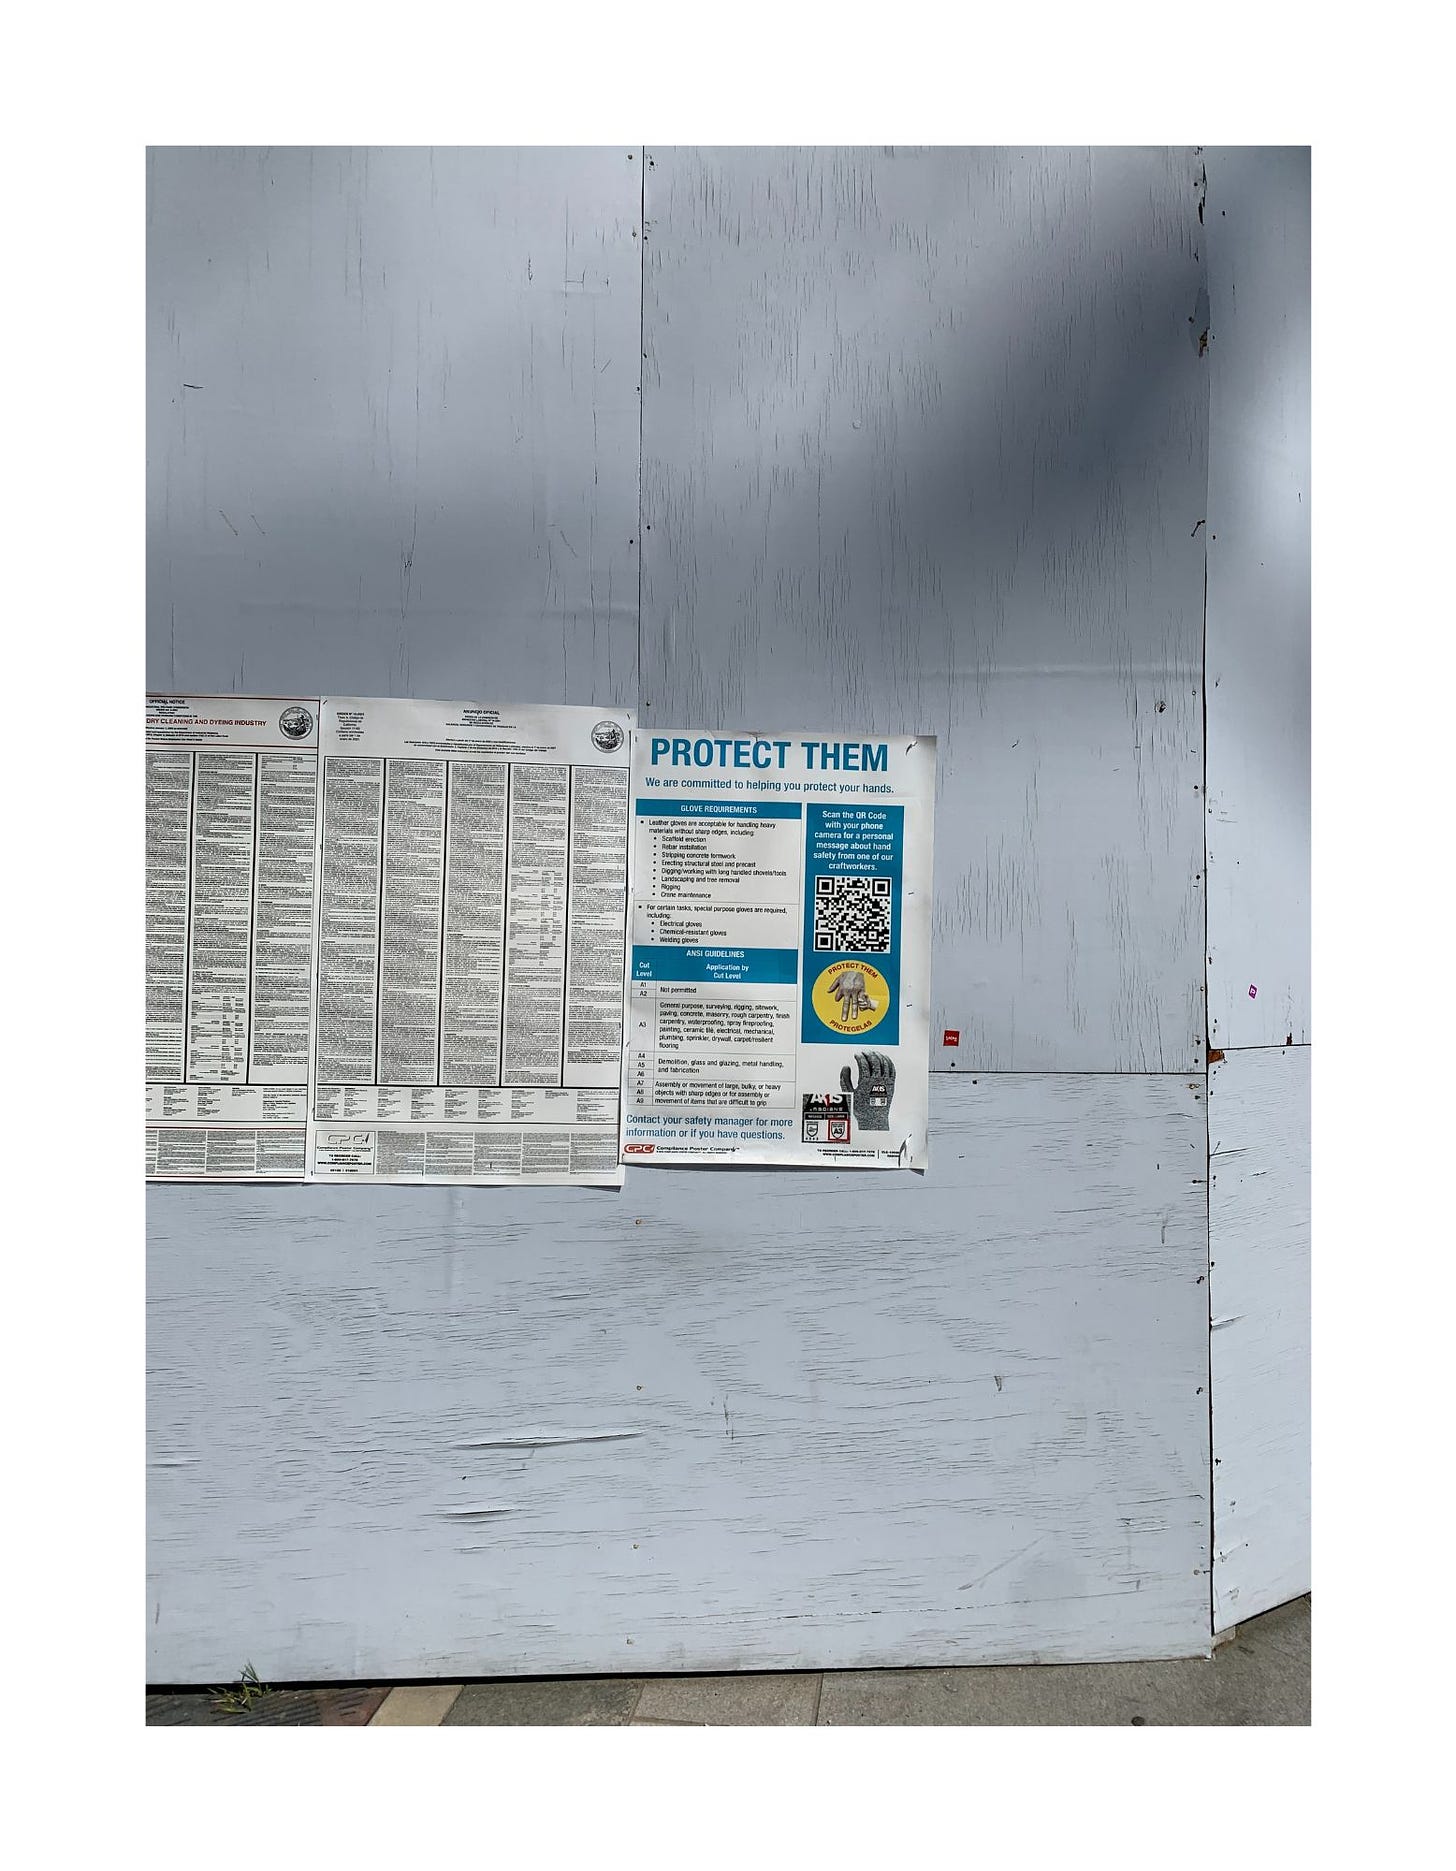 Tall wooden walls covering a construction site feature a few safety notices.